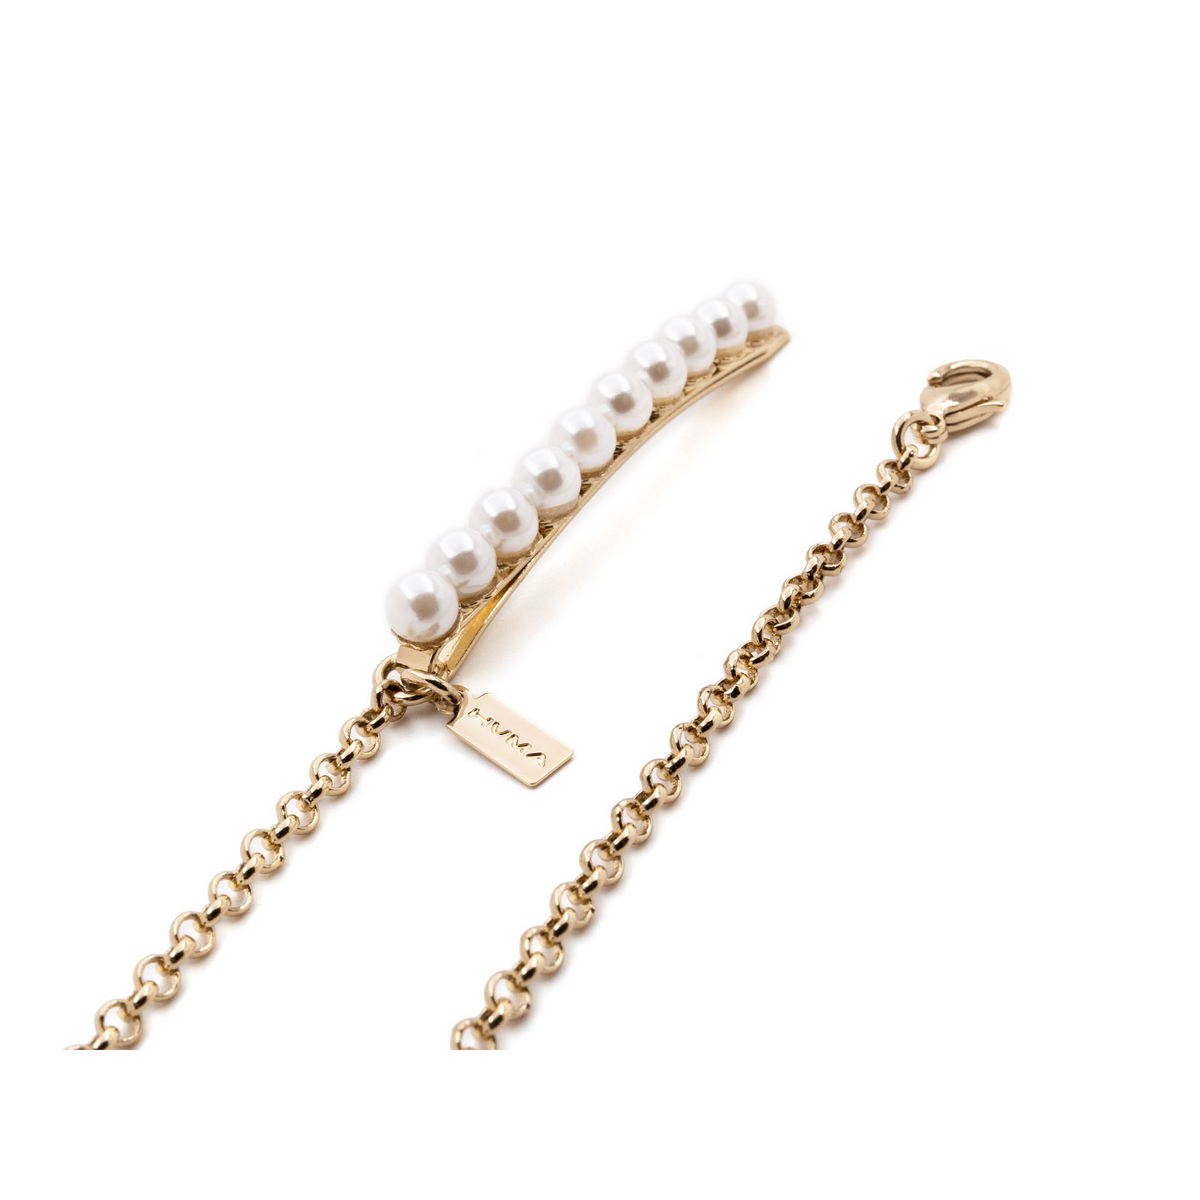 Huma EARRING PEARLS CLIP HAIR E31 Gold E31 Gold - front view